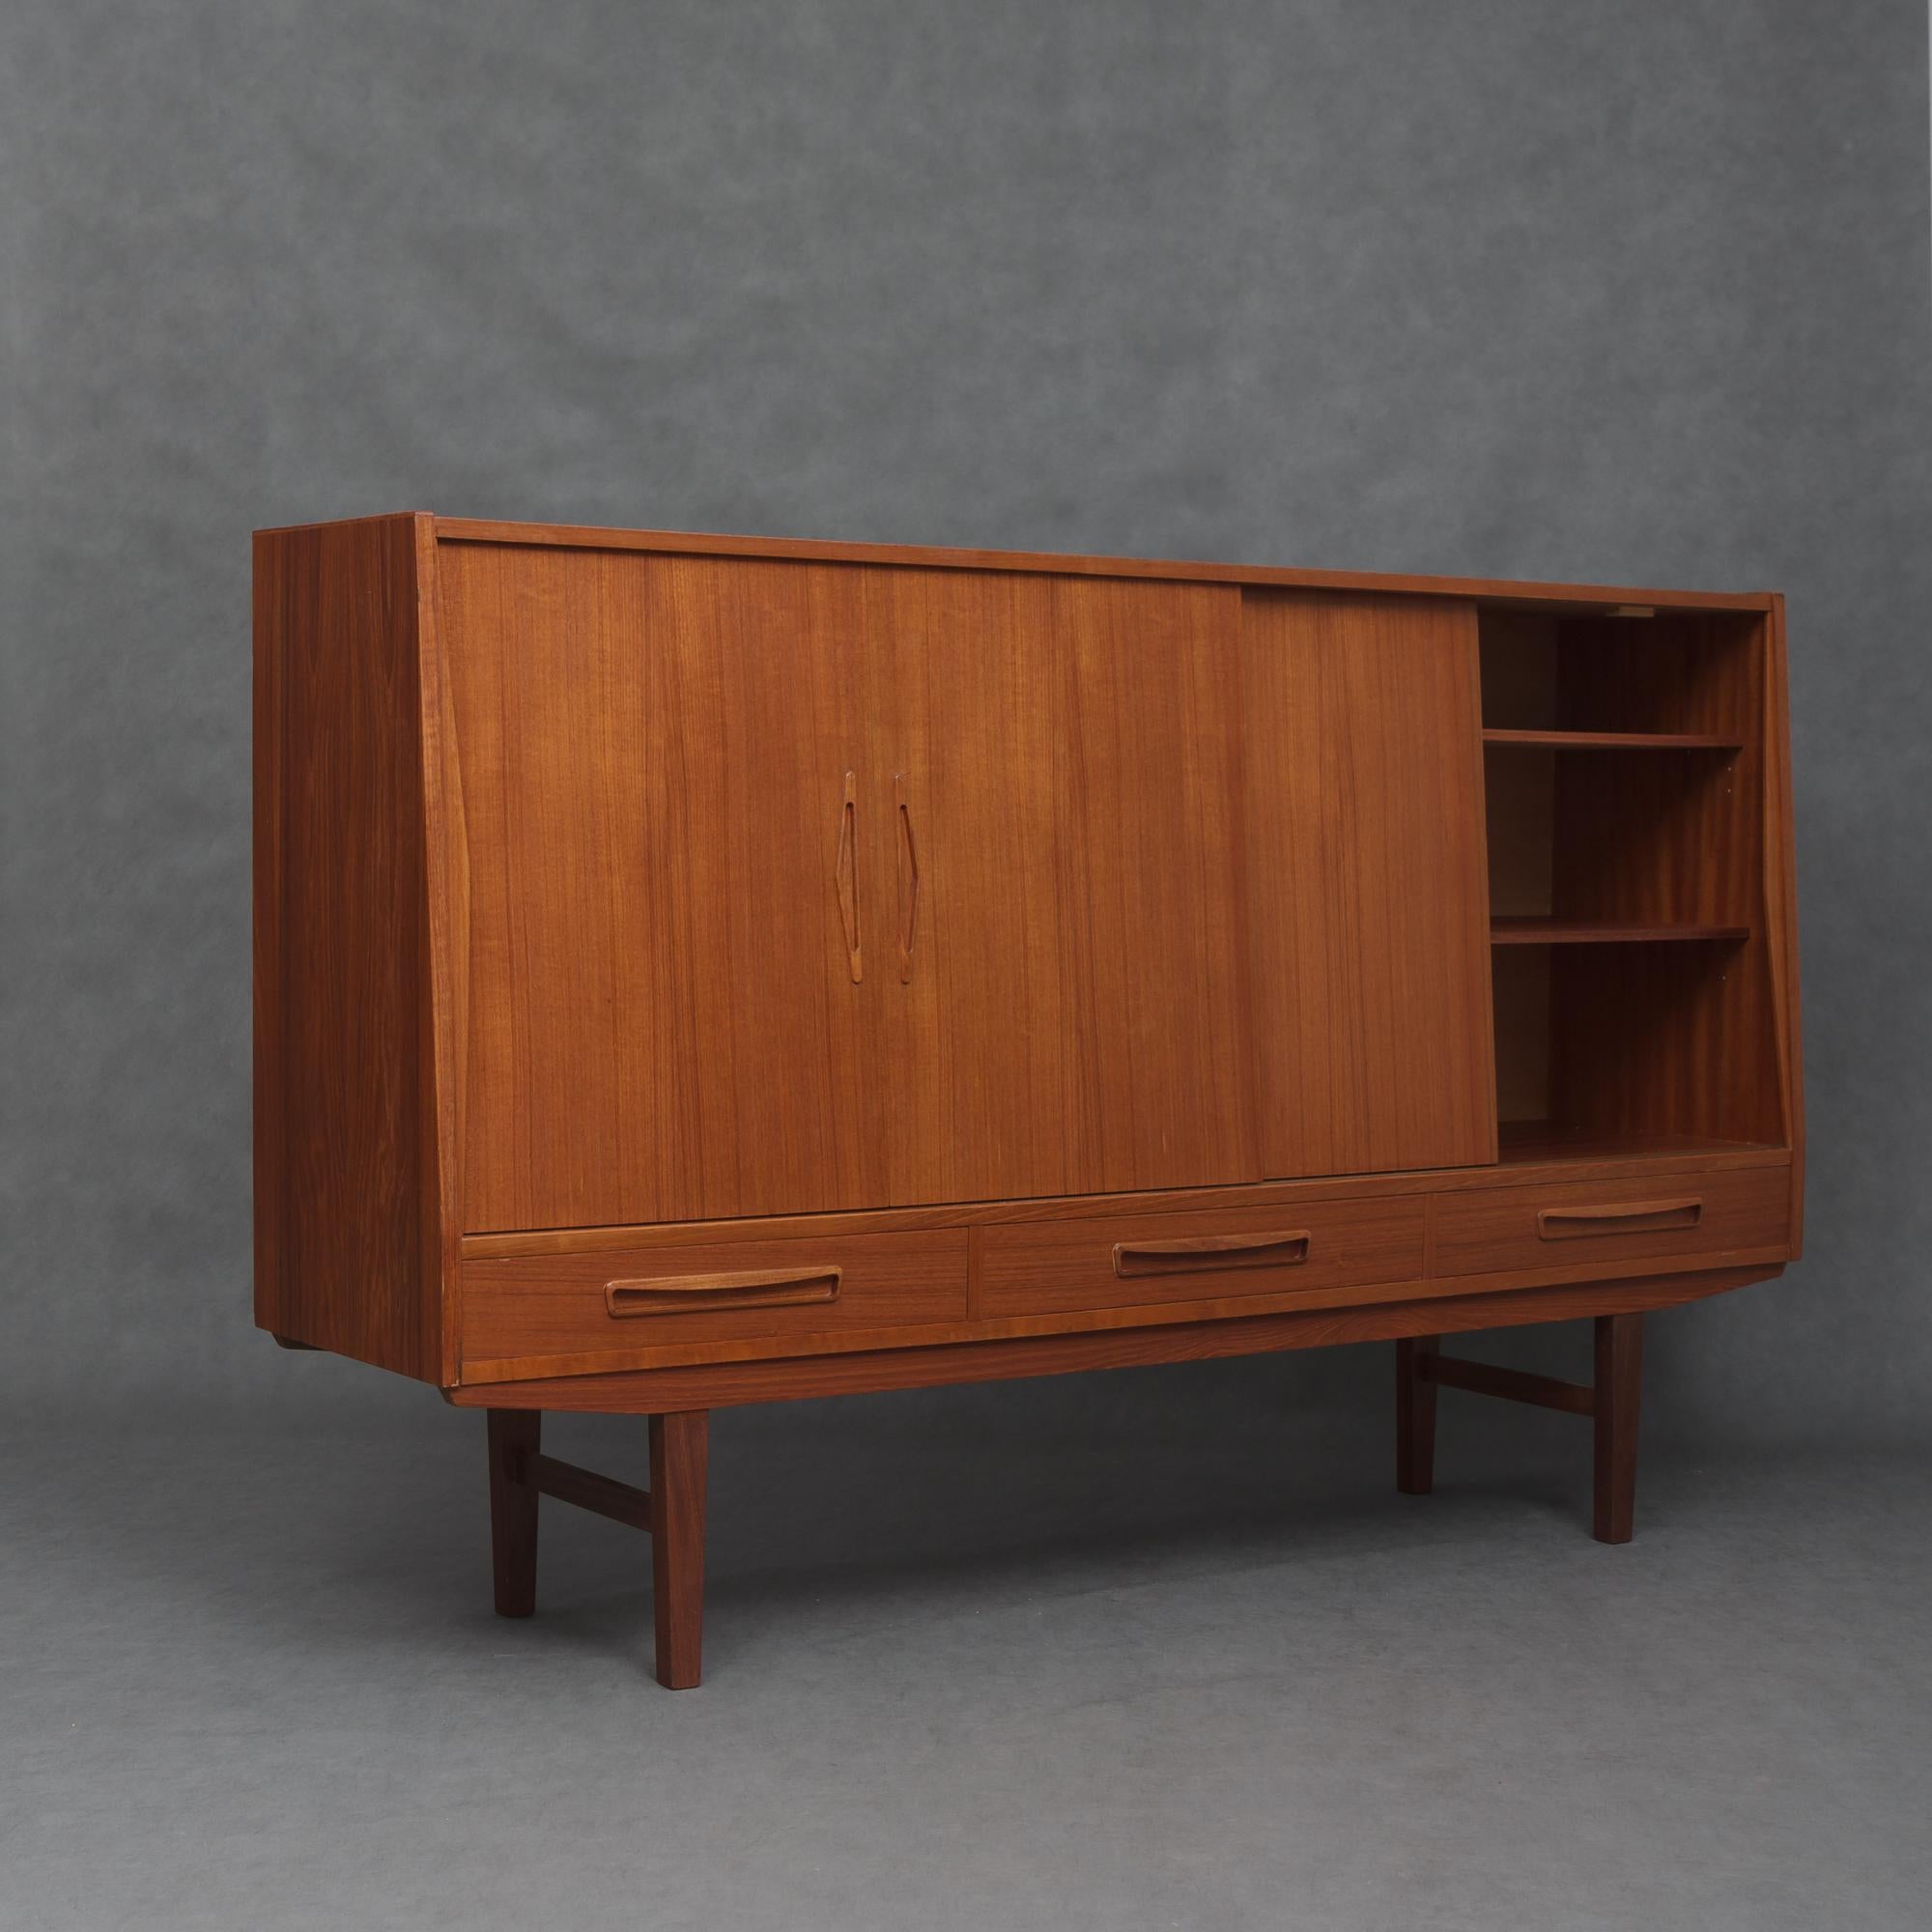 Danish Teak Highboard with a Lighted Bar from 1960s In Excellent Condition For Sale In Warsaw, PL